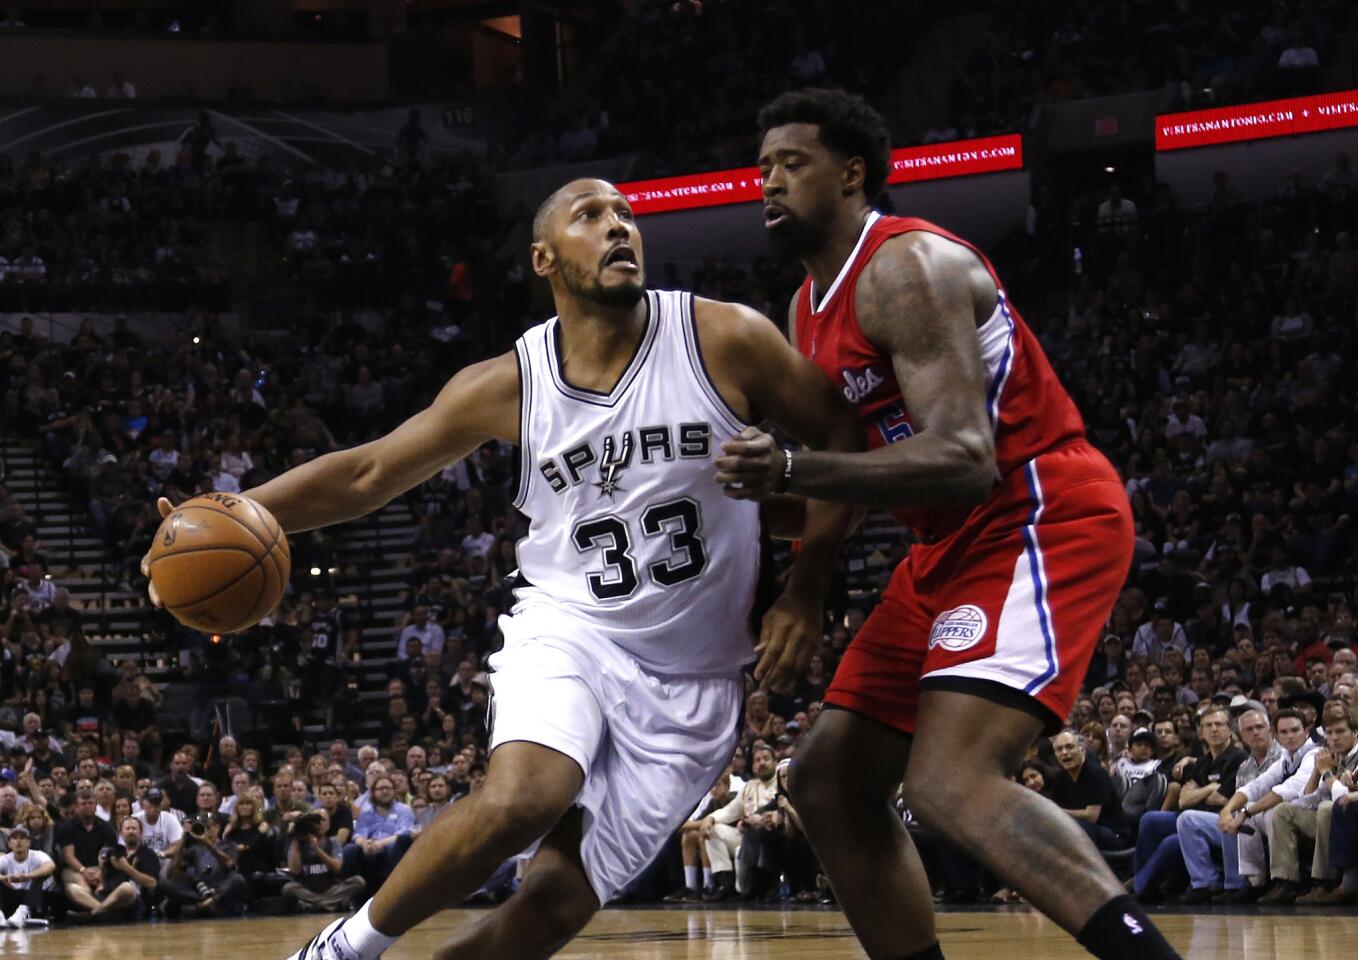 Spurs forward Boris Diaw drives against Clippers center DeAndre Jordan during Game 3 of the Western Conference quarterfinals in San Antonio on April 24.